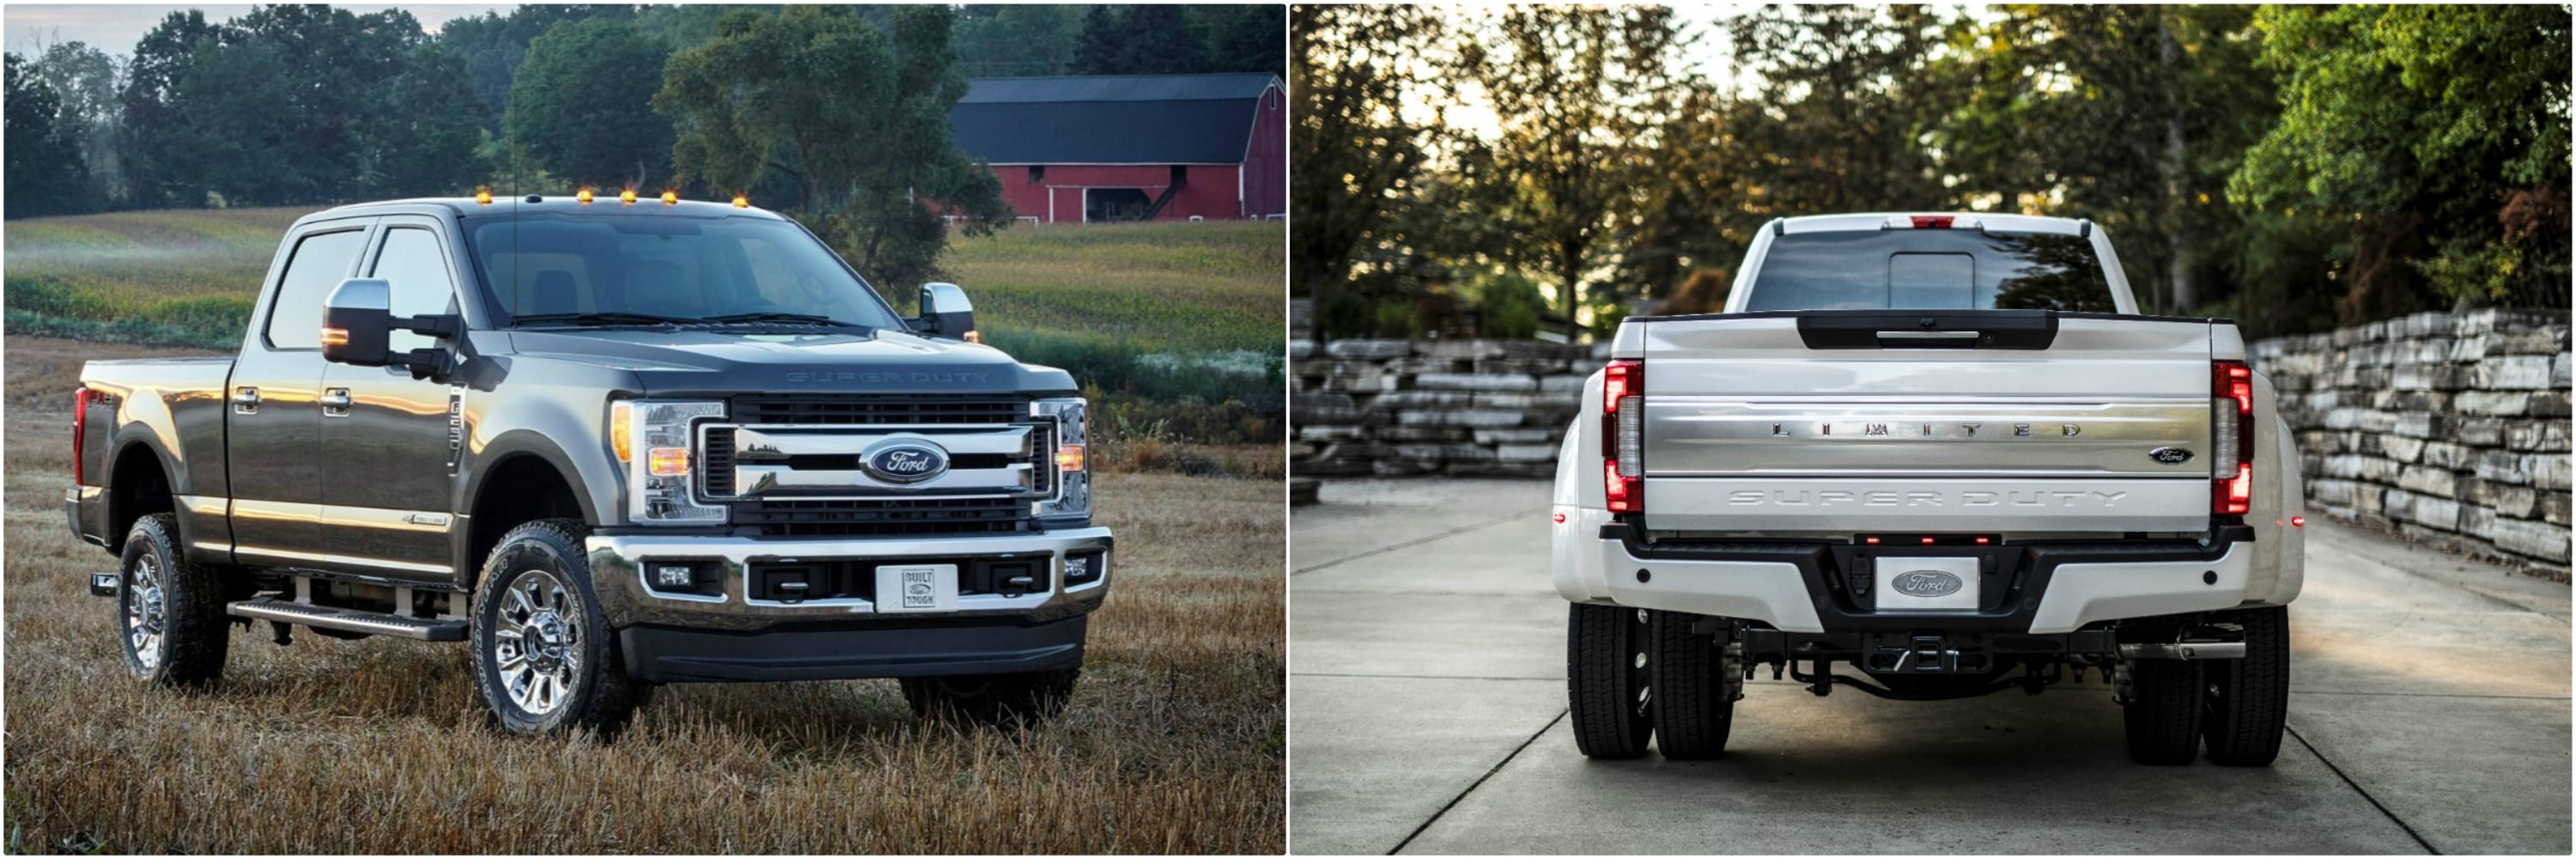 front and back views of a used Ford Super Duty truck